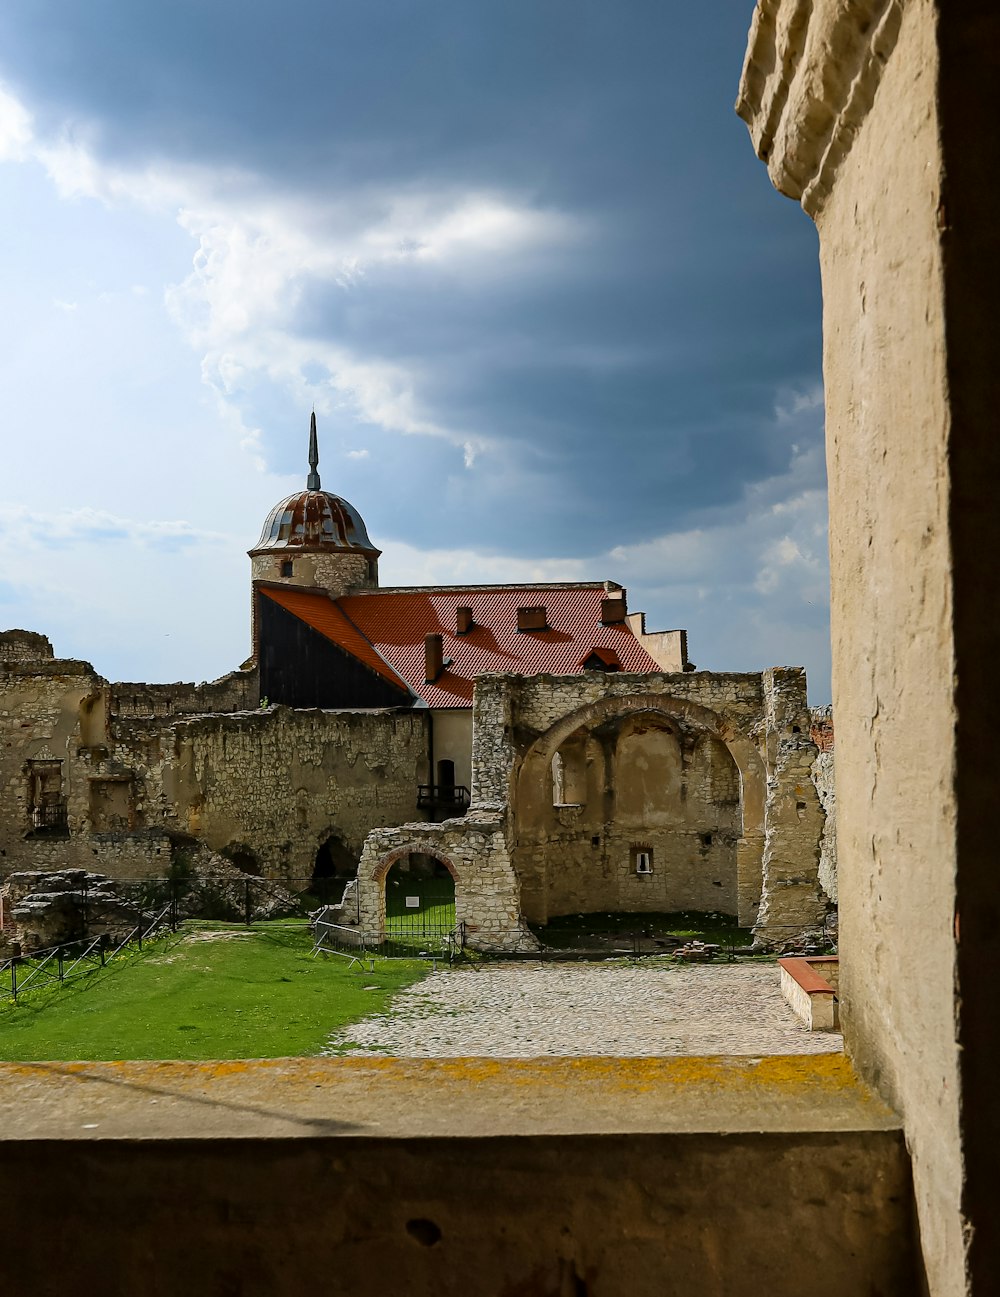 a view of a castle through a window